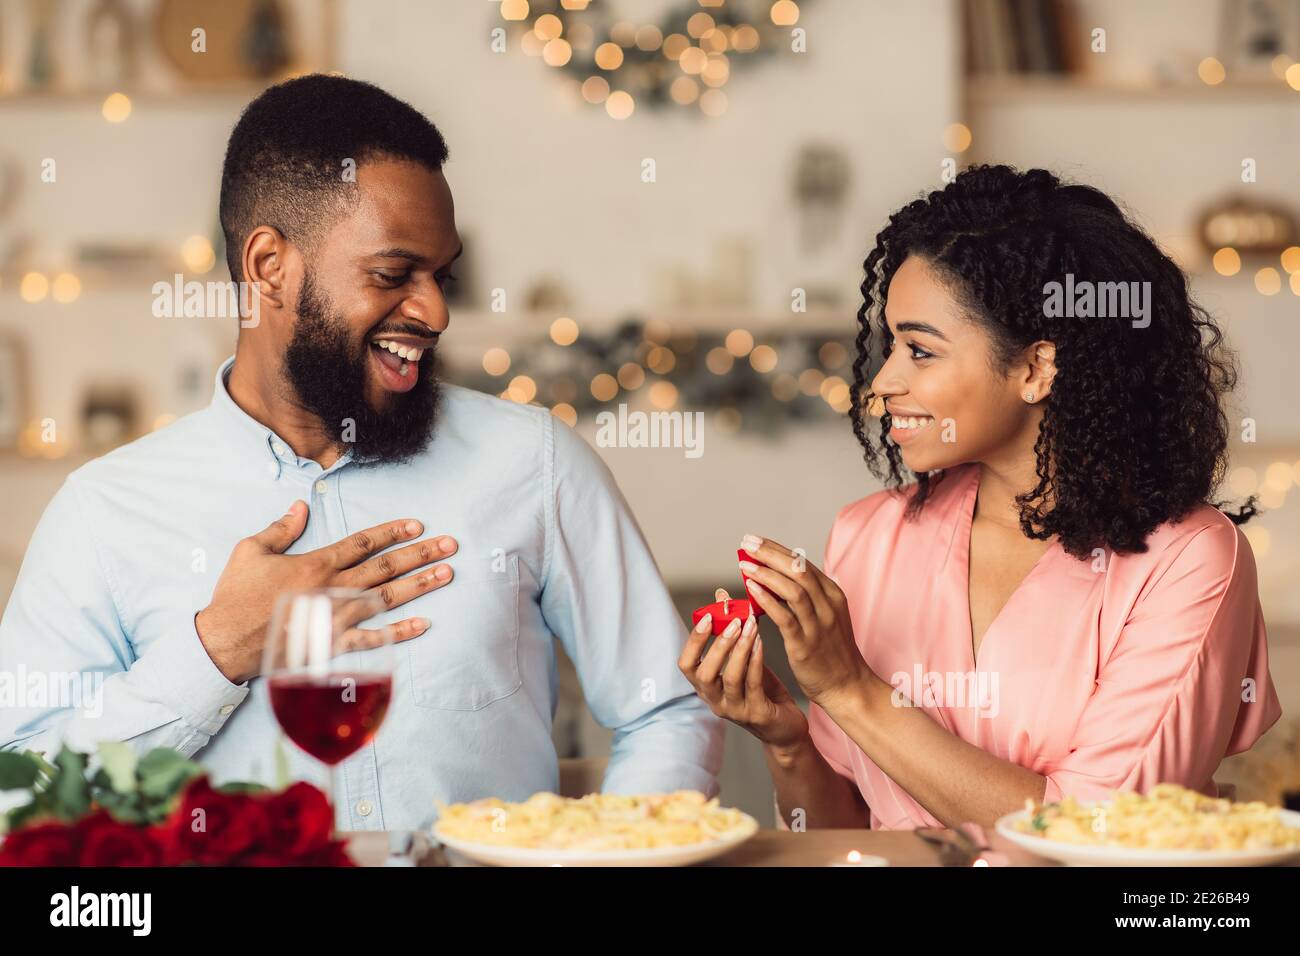 Smiling black woman making proposal with ring to her man Stock Photo